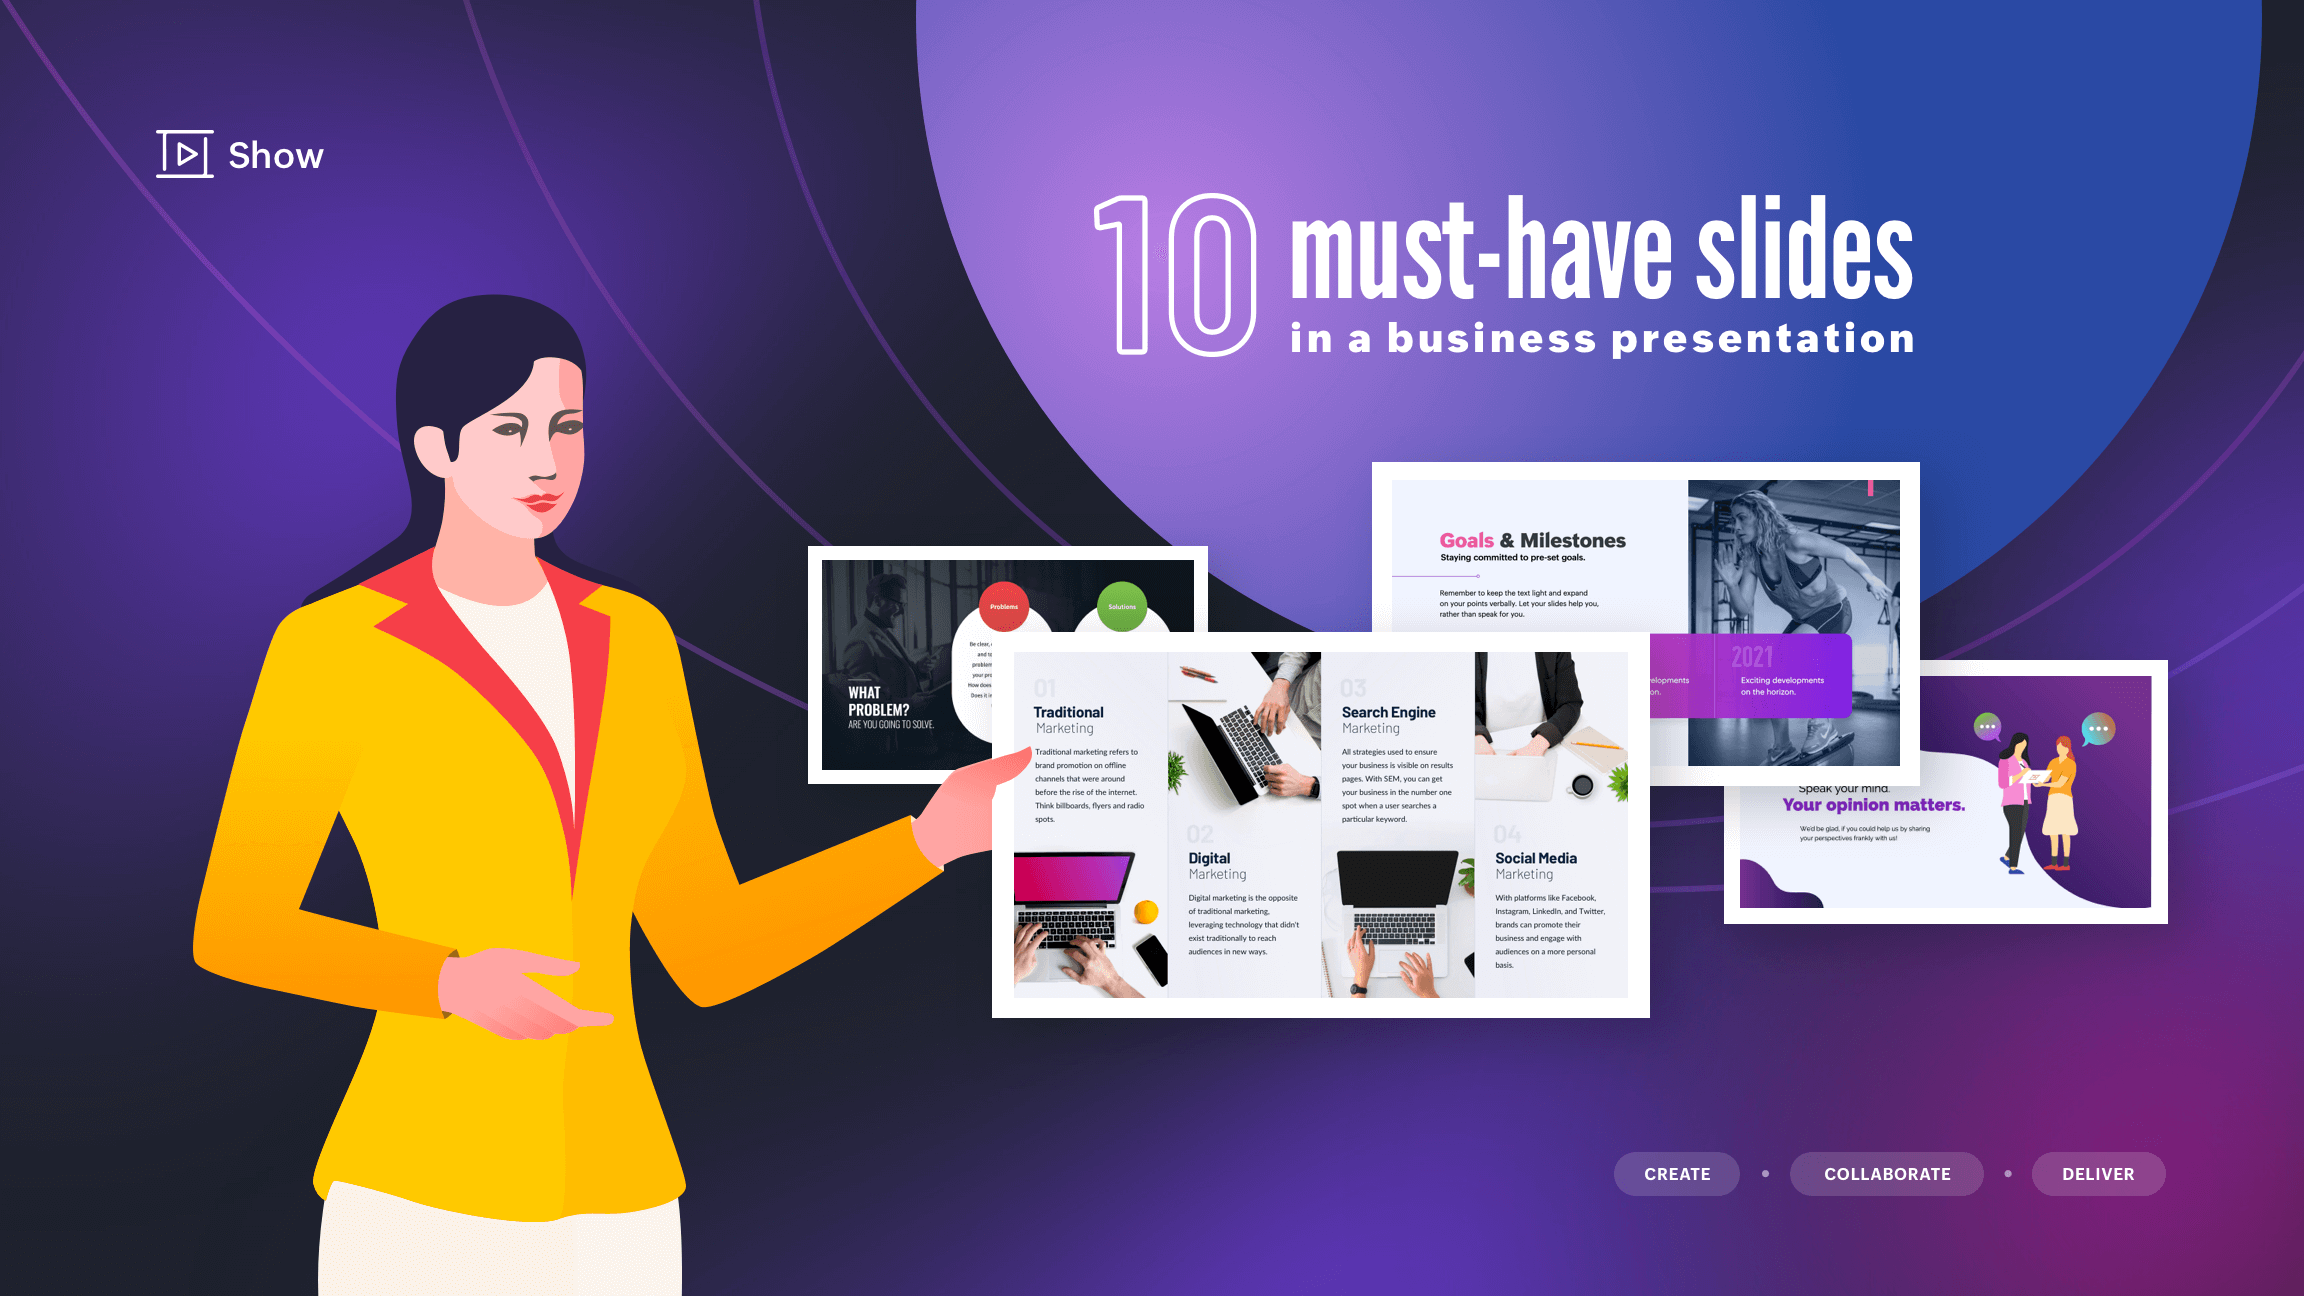 10 must-have slides in a business presentation